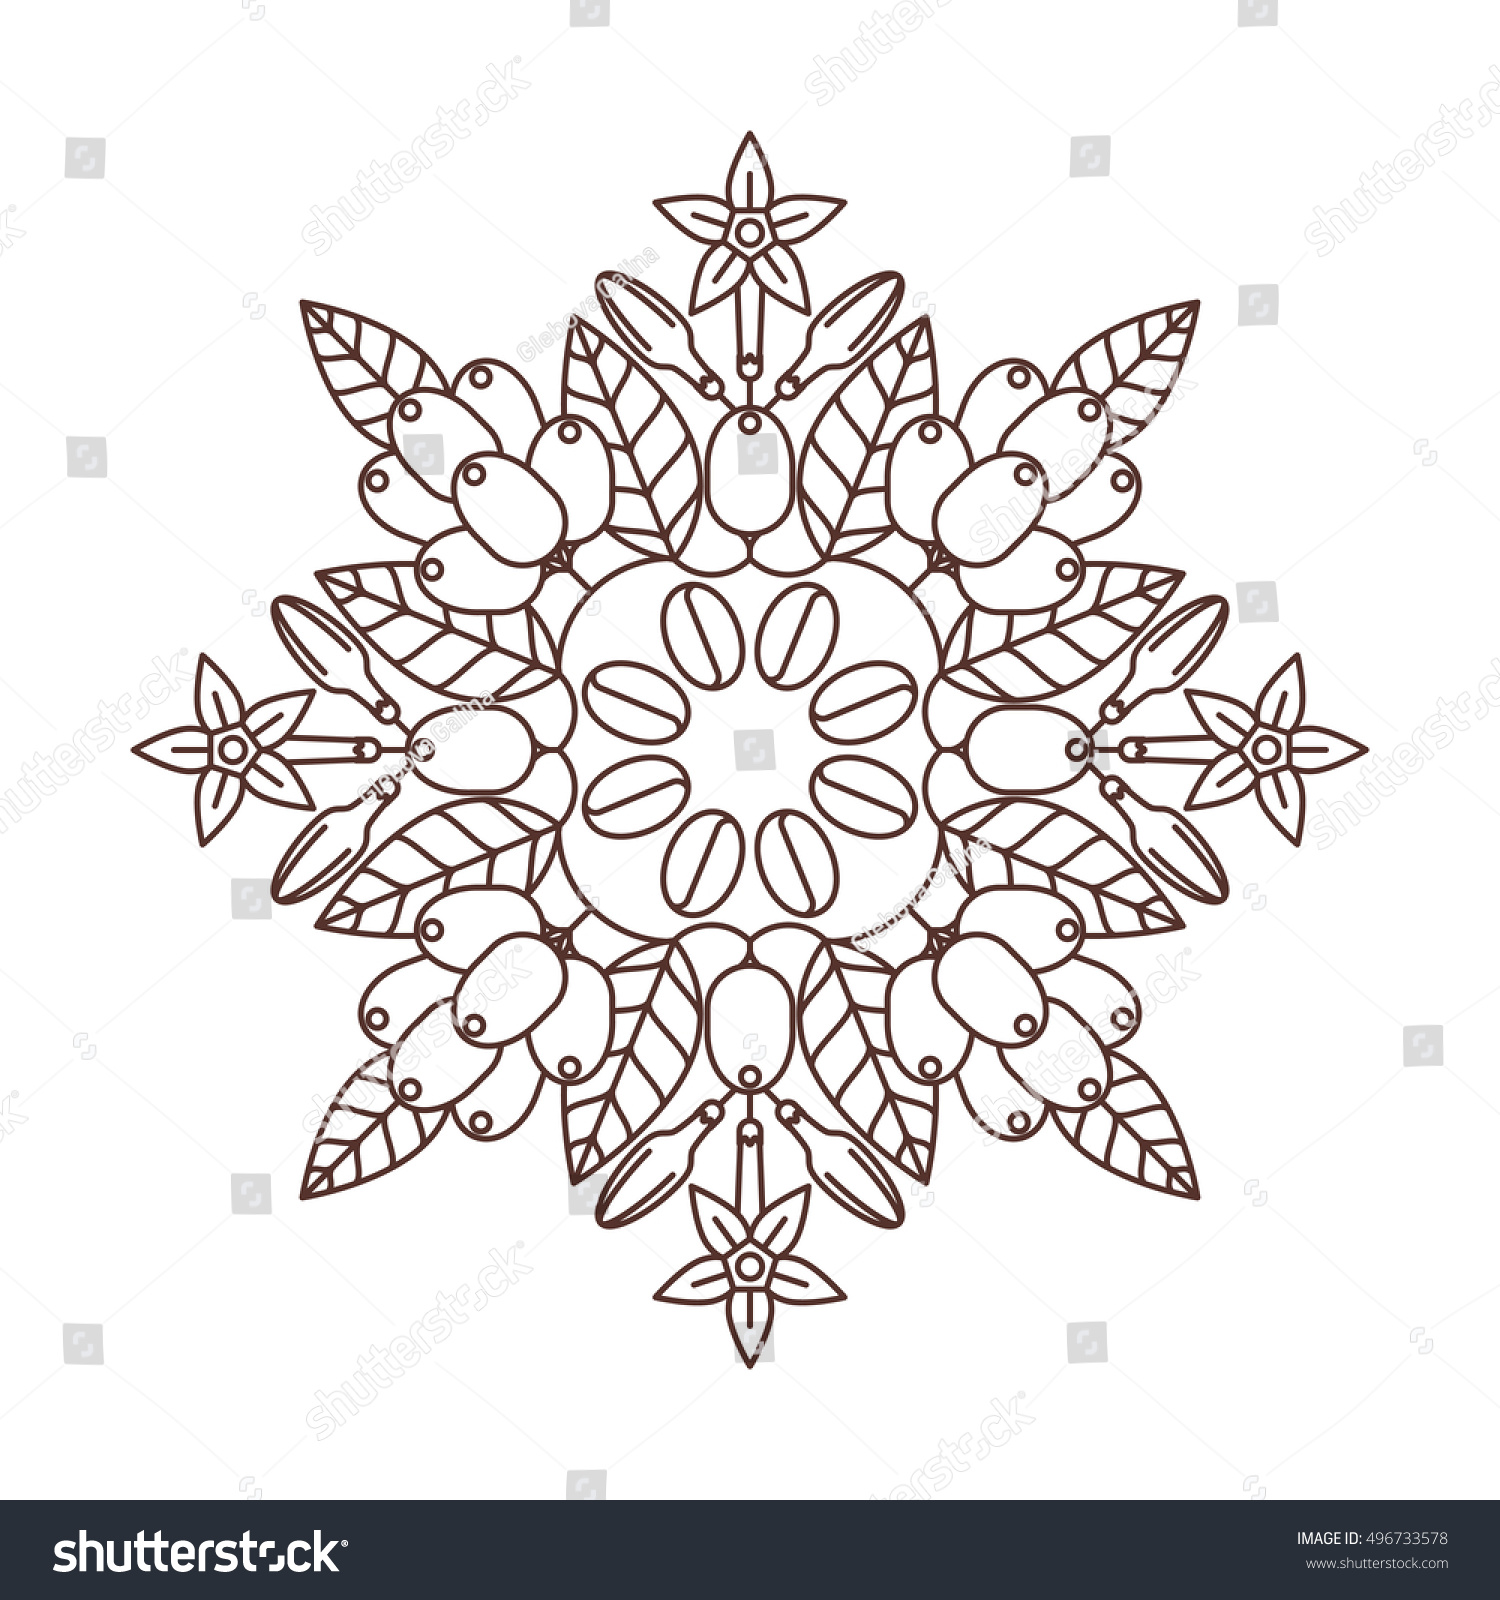 Download Vector Mandala Coffee Beans Lace Ornament Stock Vector ...